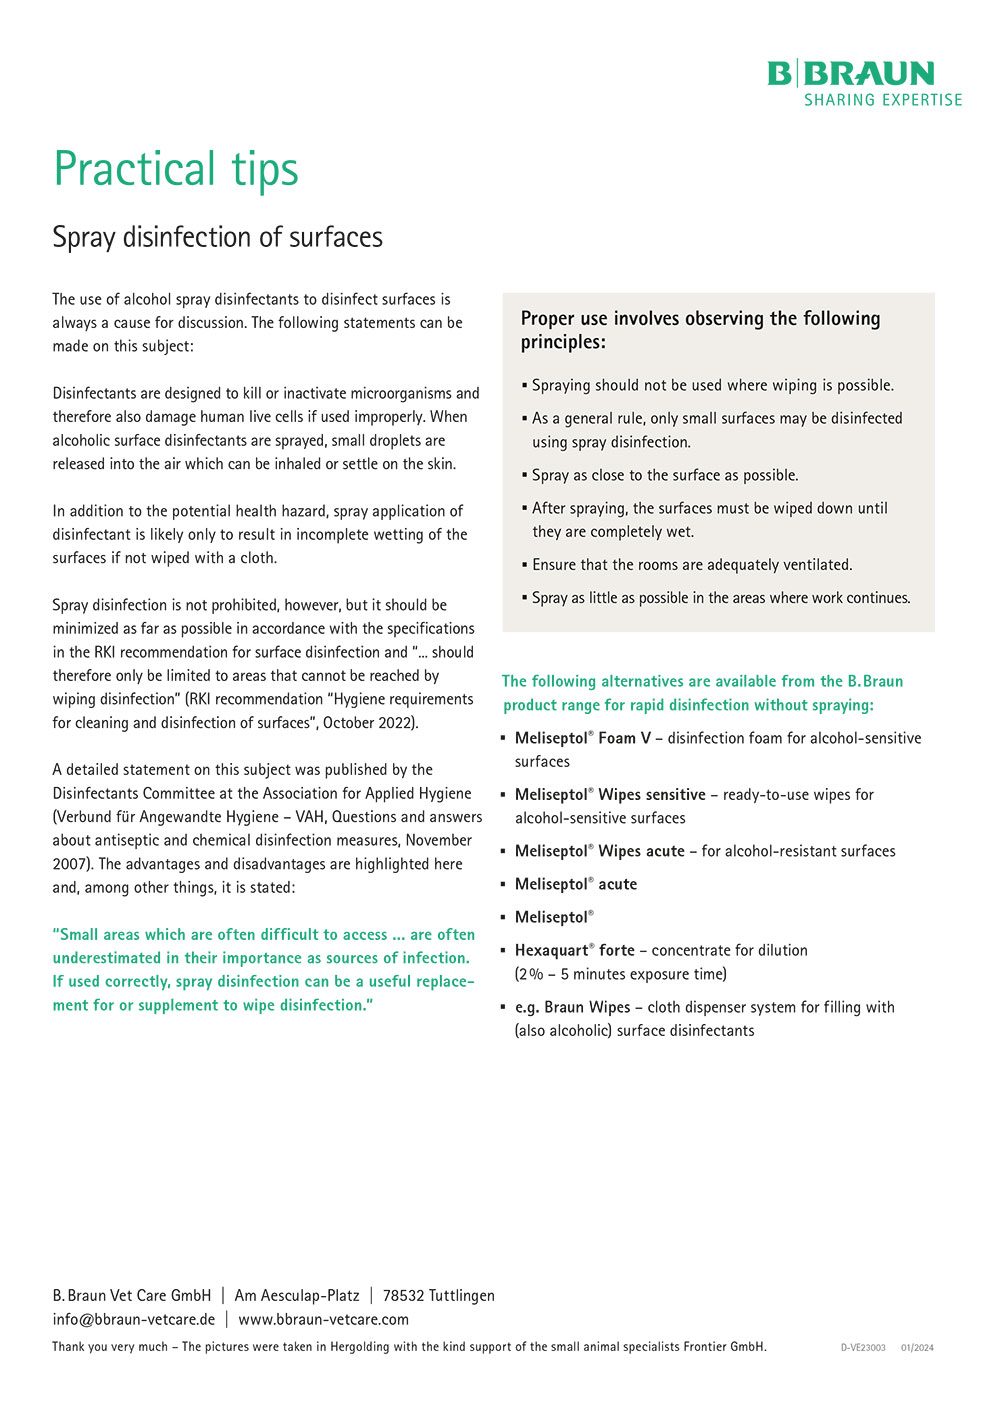 Practical tips: Spray disinfection of surfaces